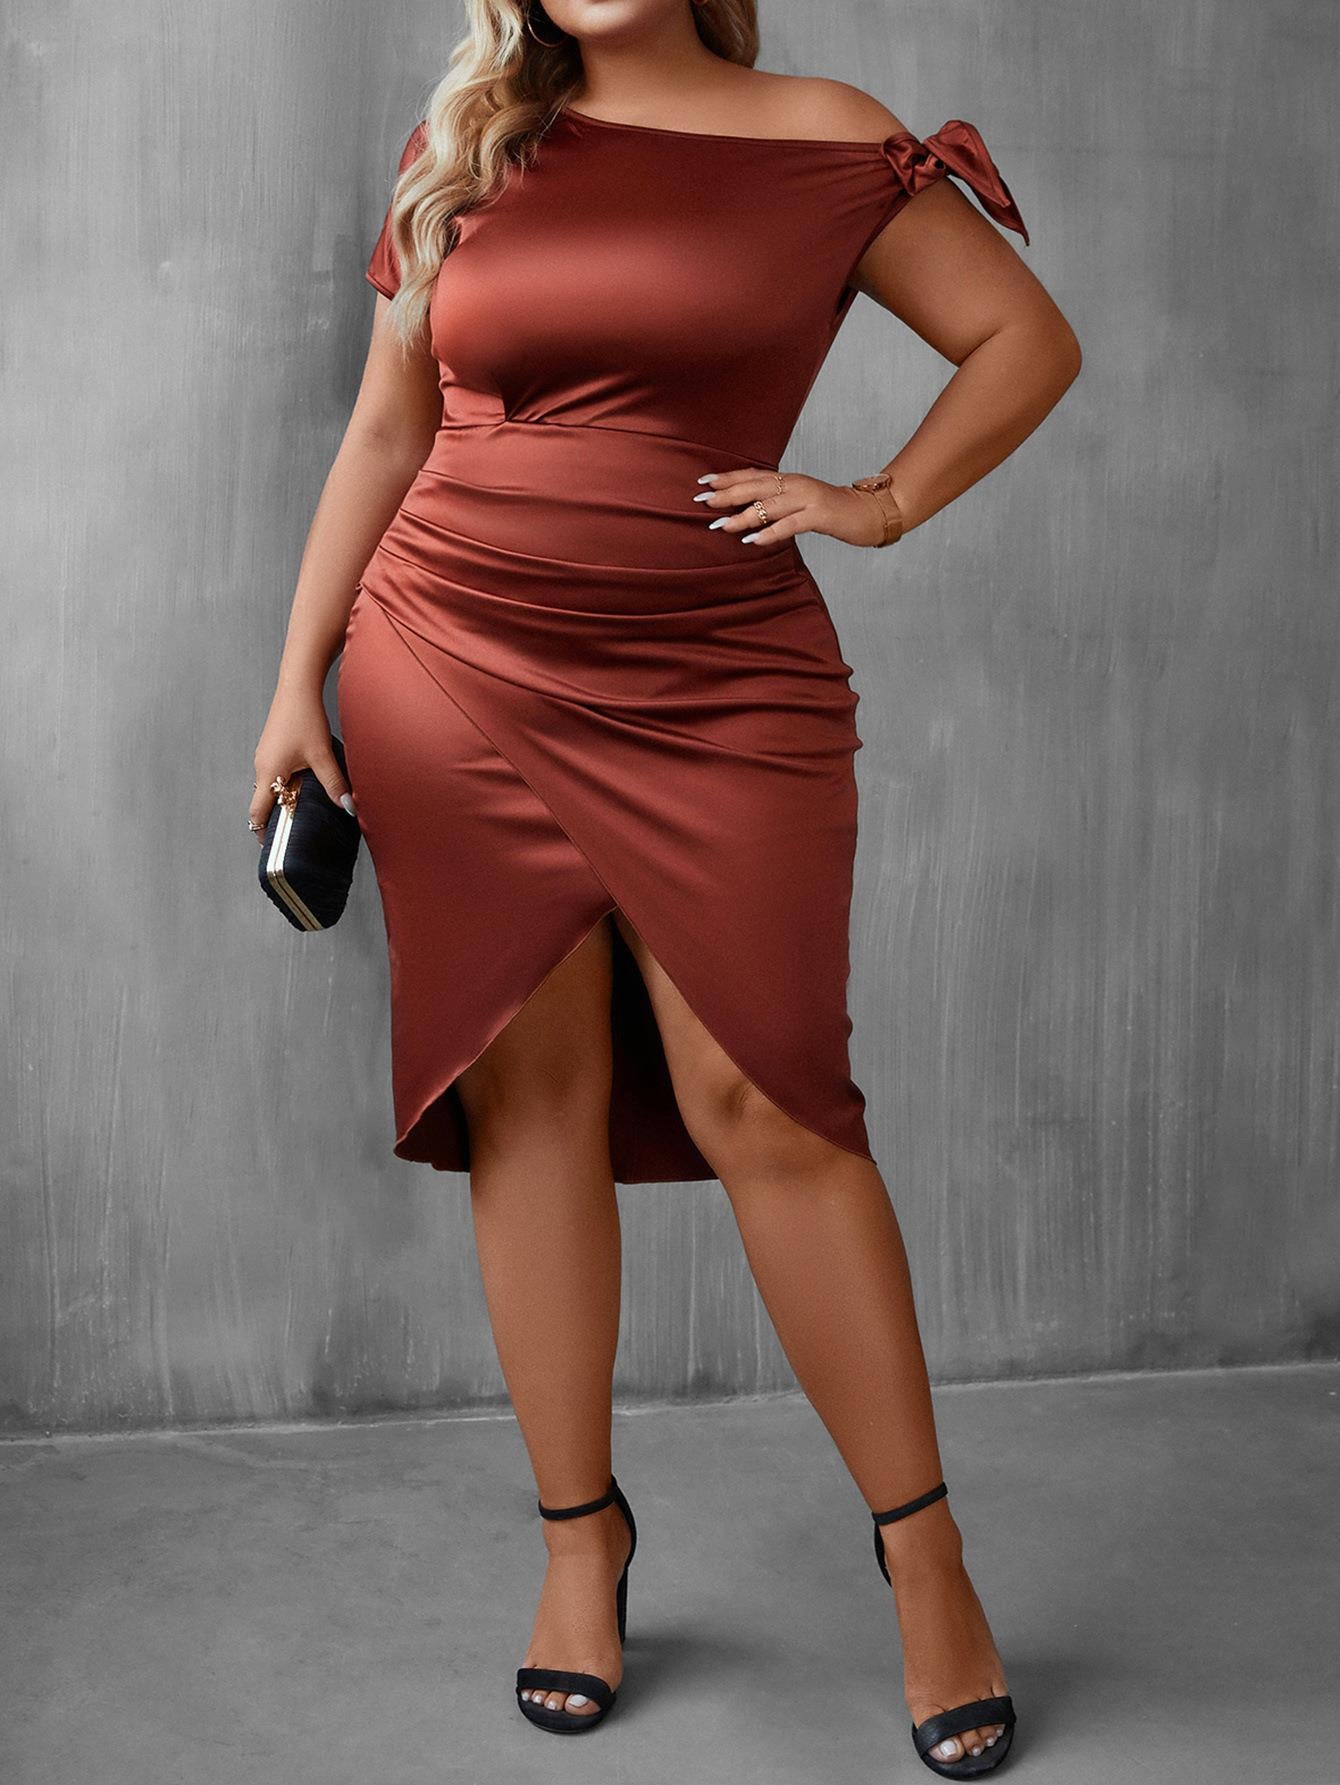 Plus Size Women Clothing Casual Solid Color Diagonal Collar Short Sleeve Sheath Dress